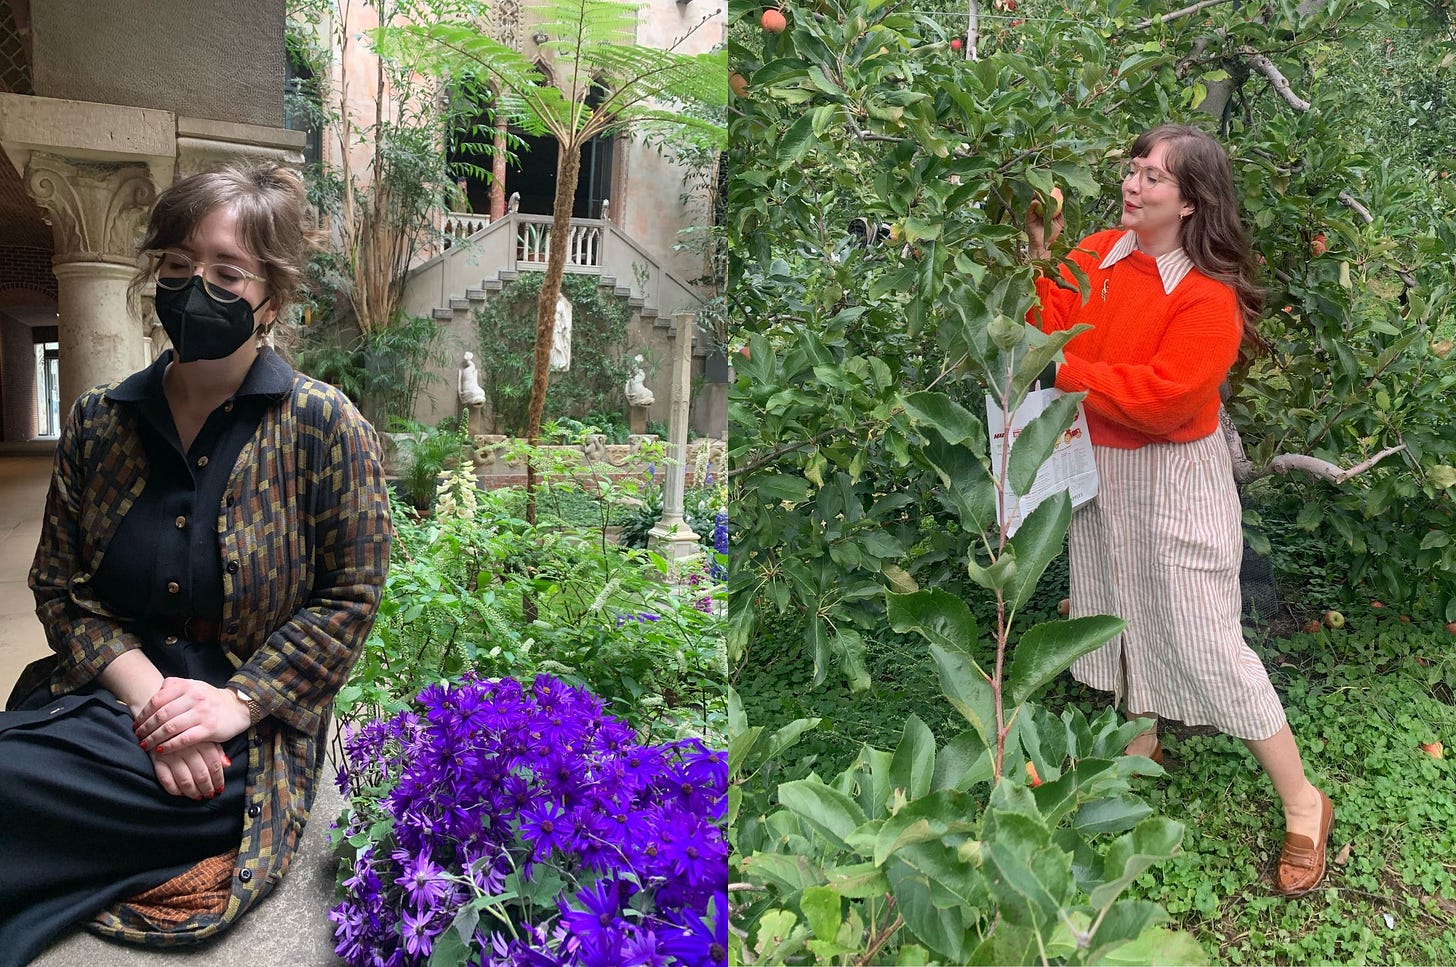 Molly looking like a lady of “loveliness and dignity” in her Revelle Collection Marcel Dress with Ace and Jig Ari shirtdress layered over at the Isabella Stewart Gardener Museum courtyard, left; and in Revelle Collection Marlowe Dress with Everlane Alpaca Sweater at X farm, right.